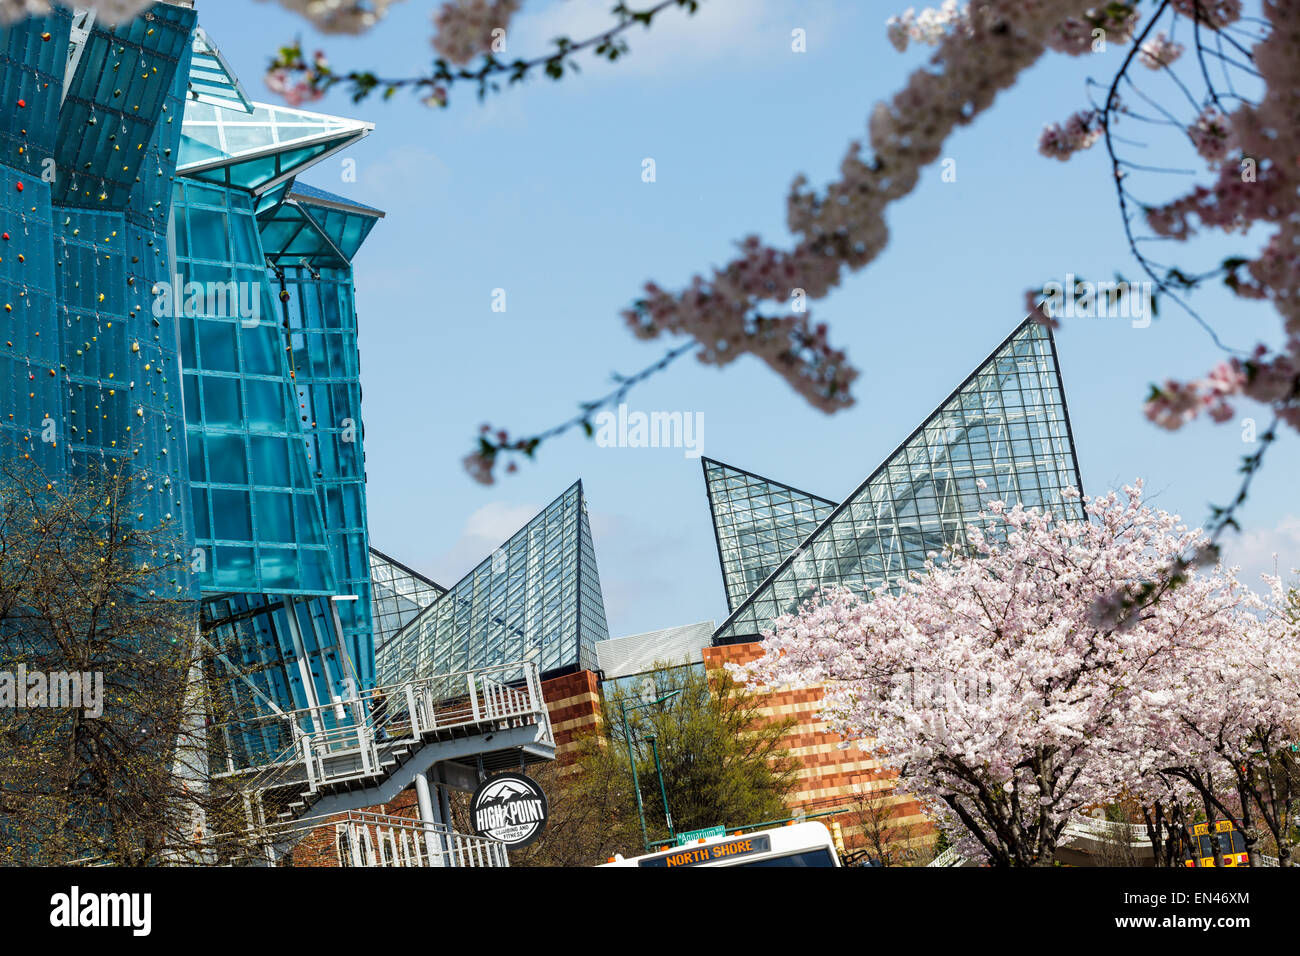 Tennessee Aquarium and at left, climbing walls at The Block, Chattanooga, Tennessee, USA Stock Photo